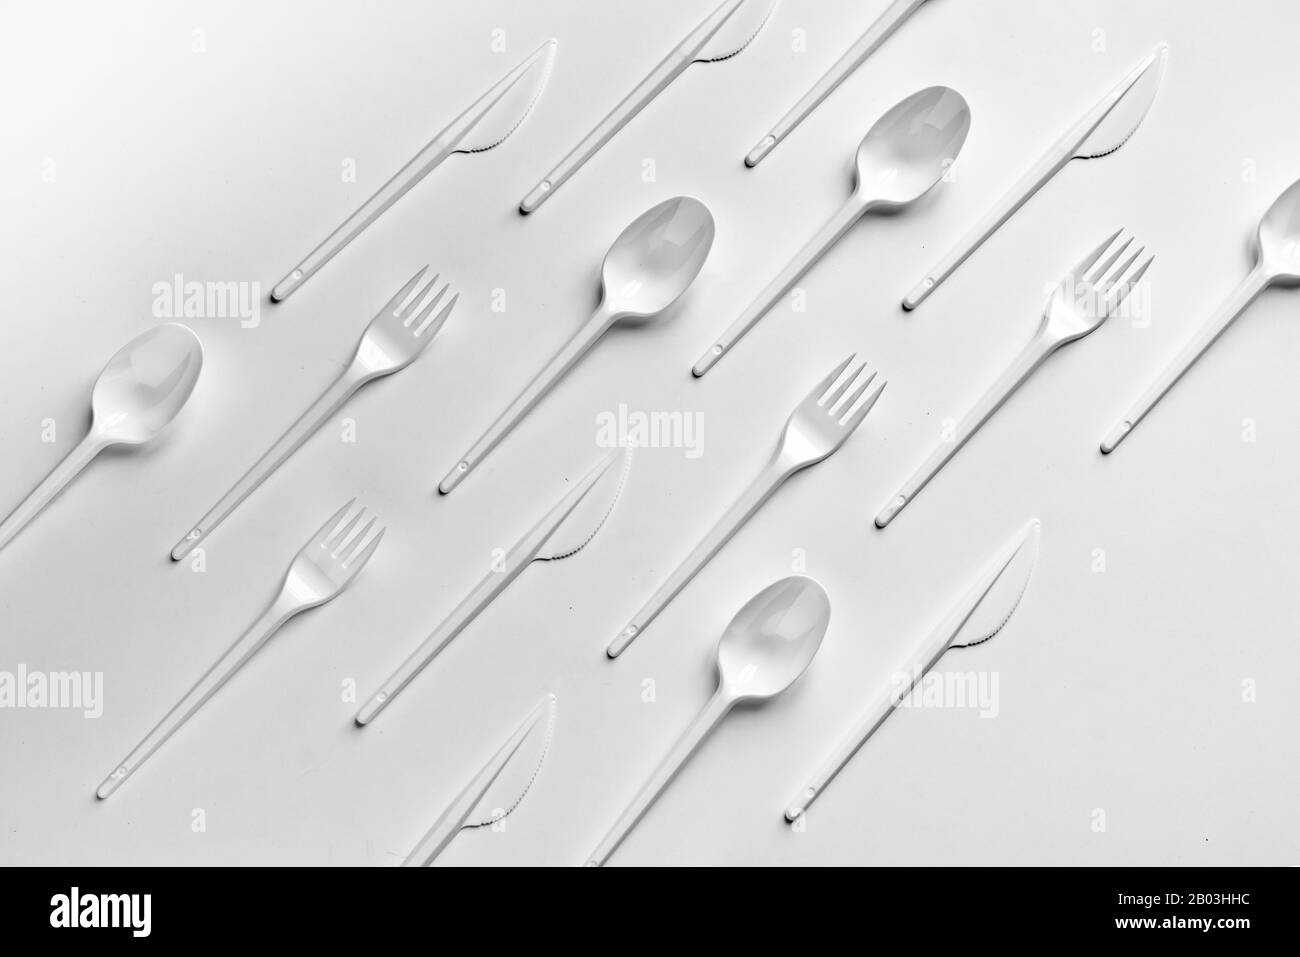 creative flat lay of plastic forks spoons and knifes pattern Stock Photo